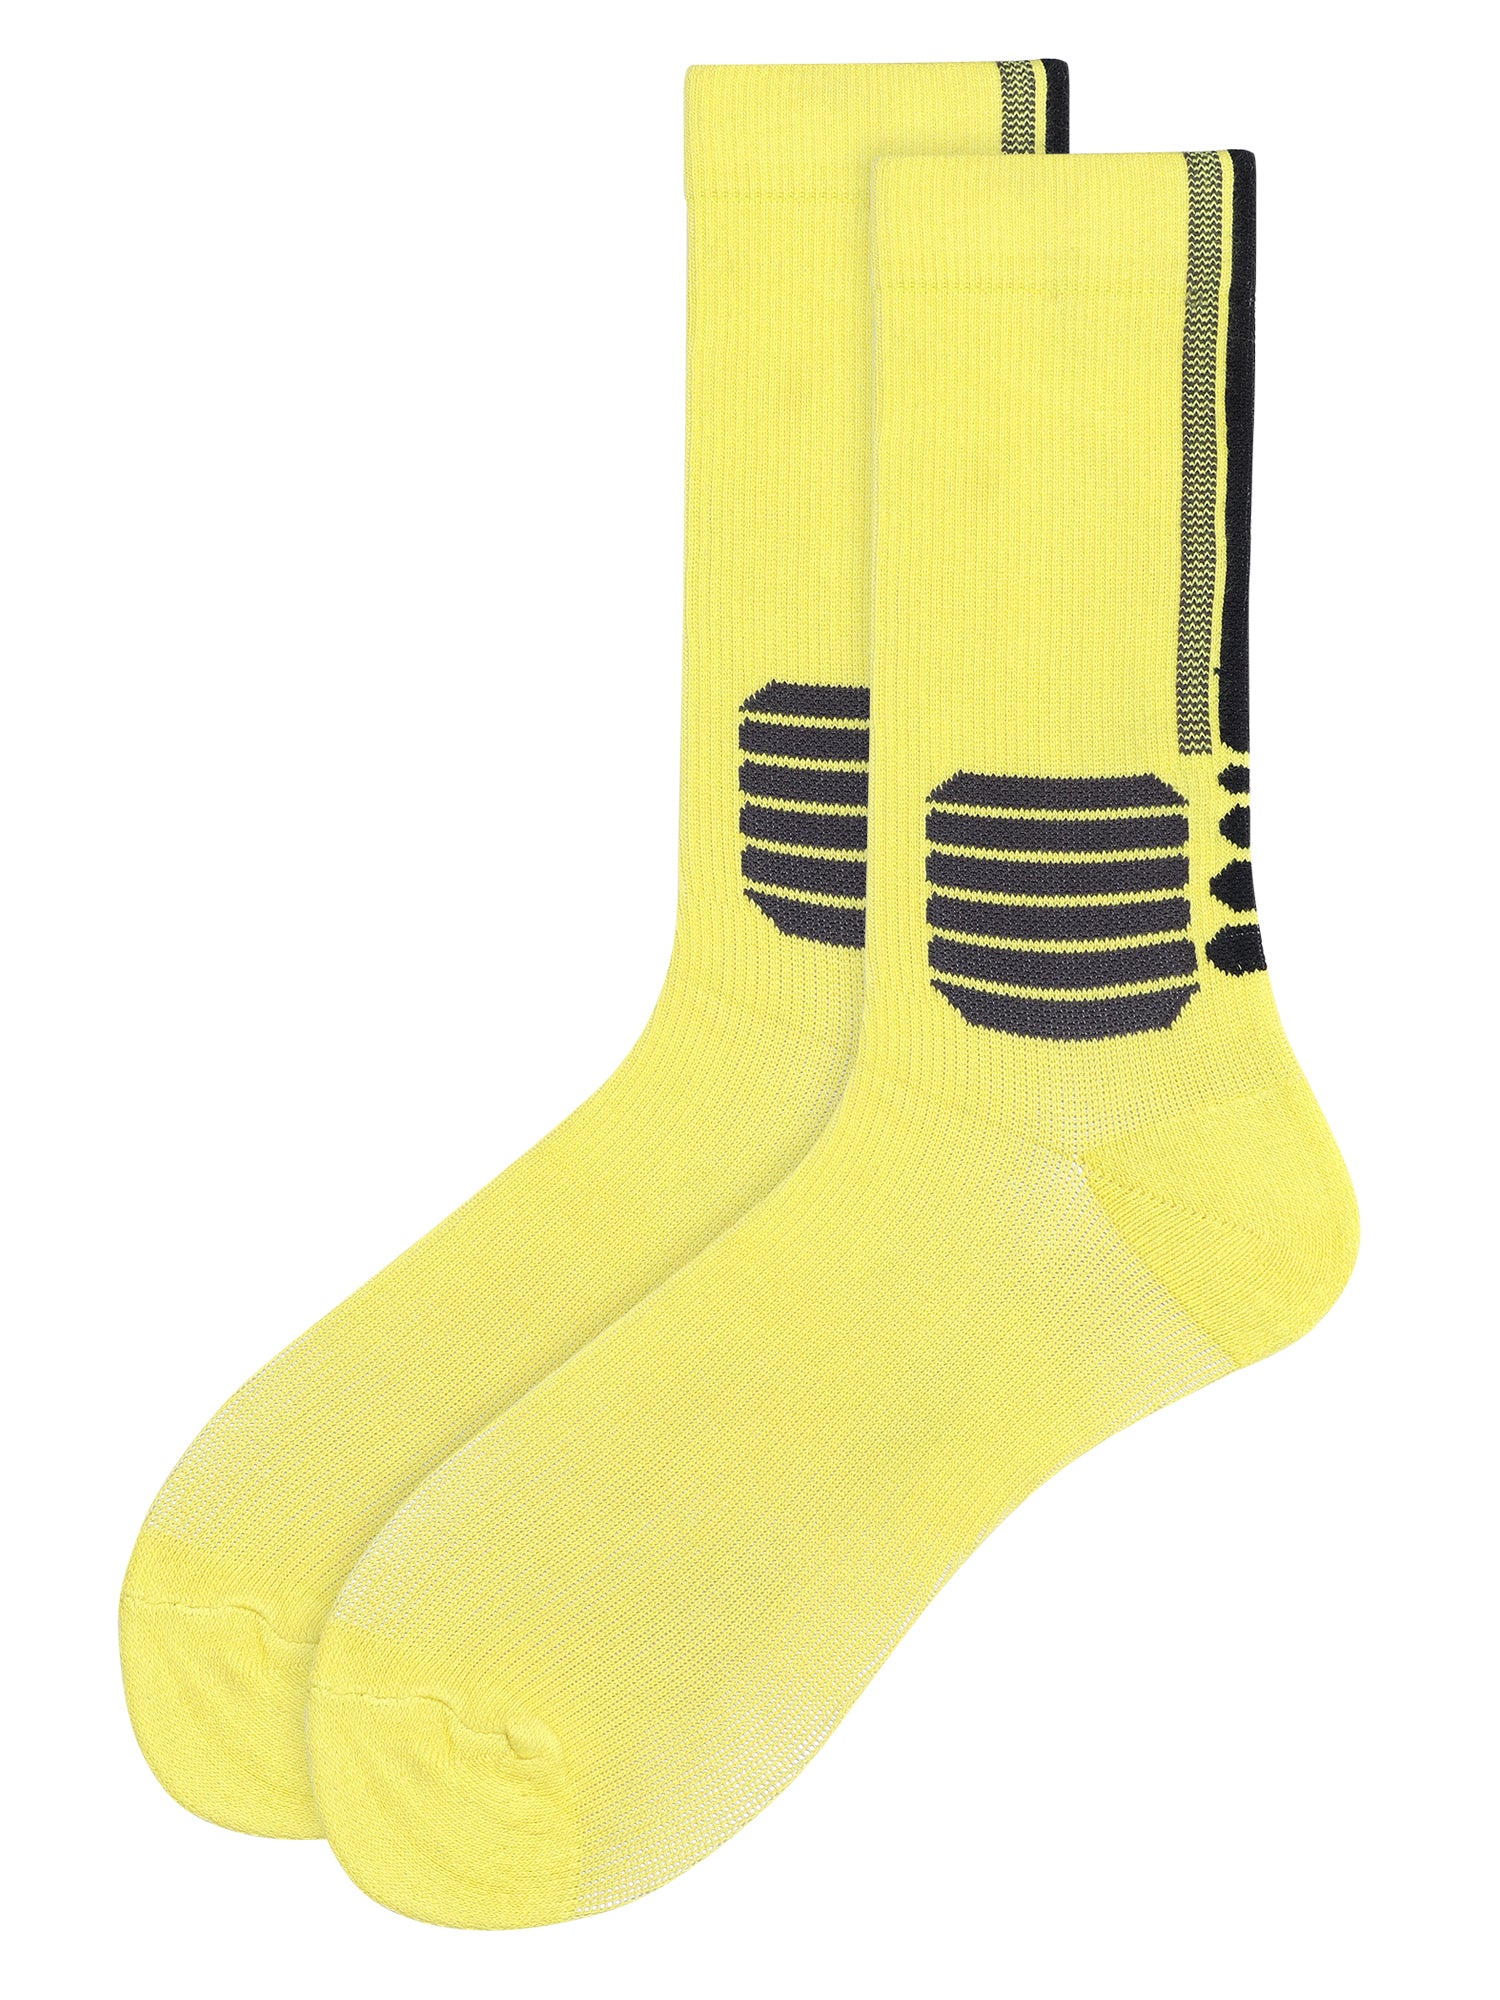 Compression Therapy | Stand Out Box Of 4 Pairs | Travel Socks